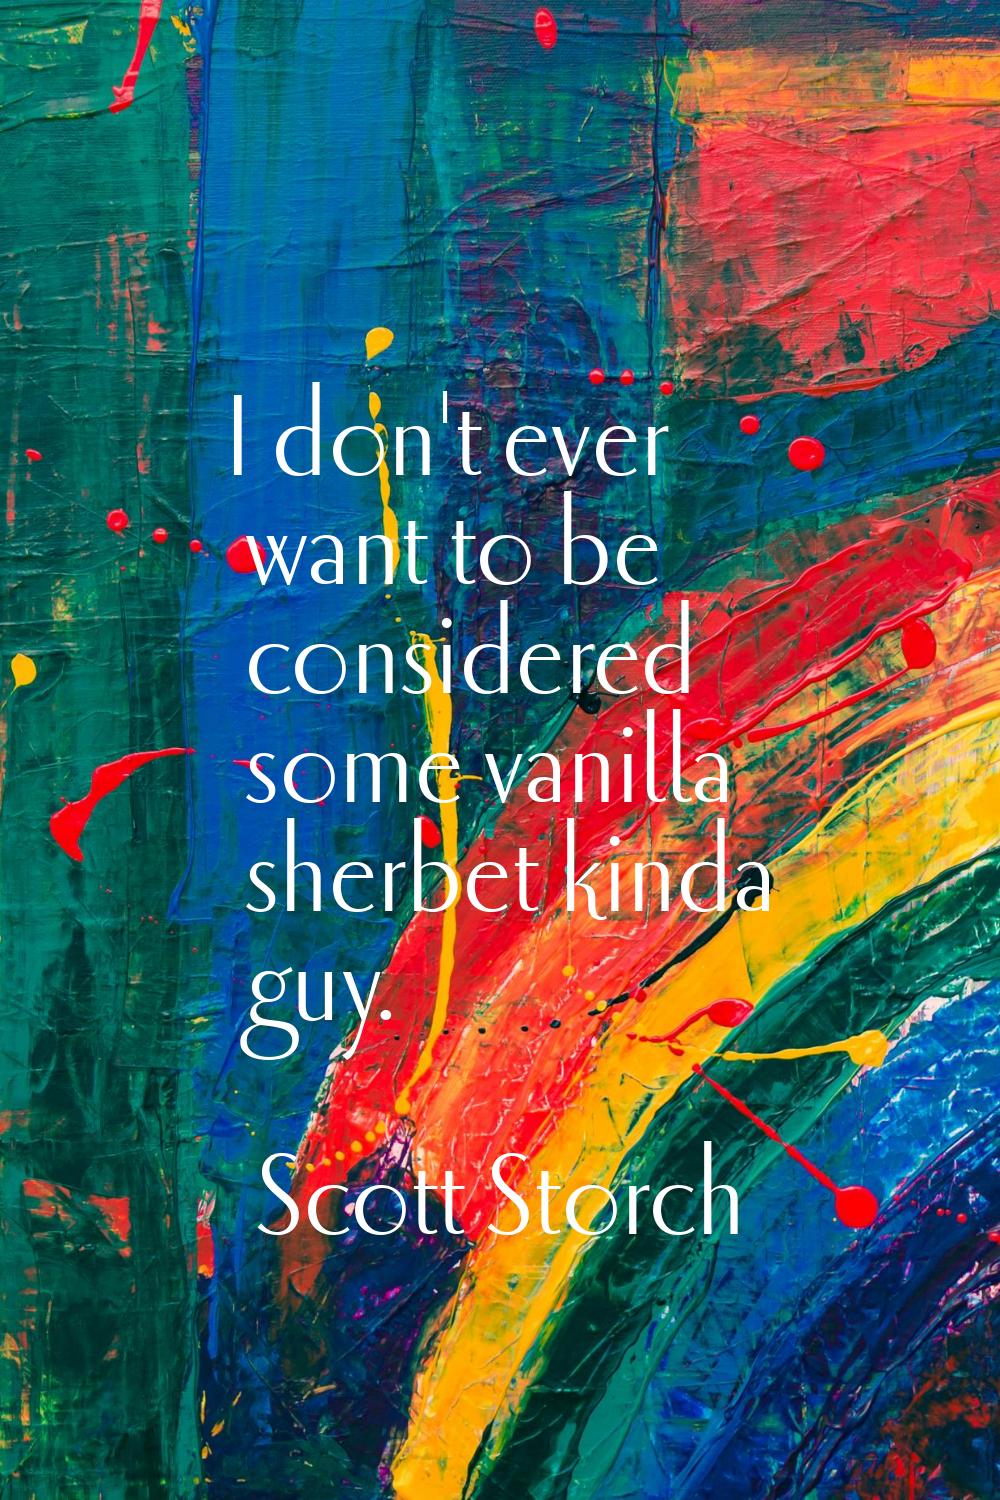 I don't ever want to be considered some vanilla sherbet kinda guy.